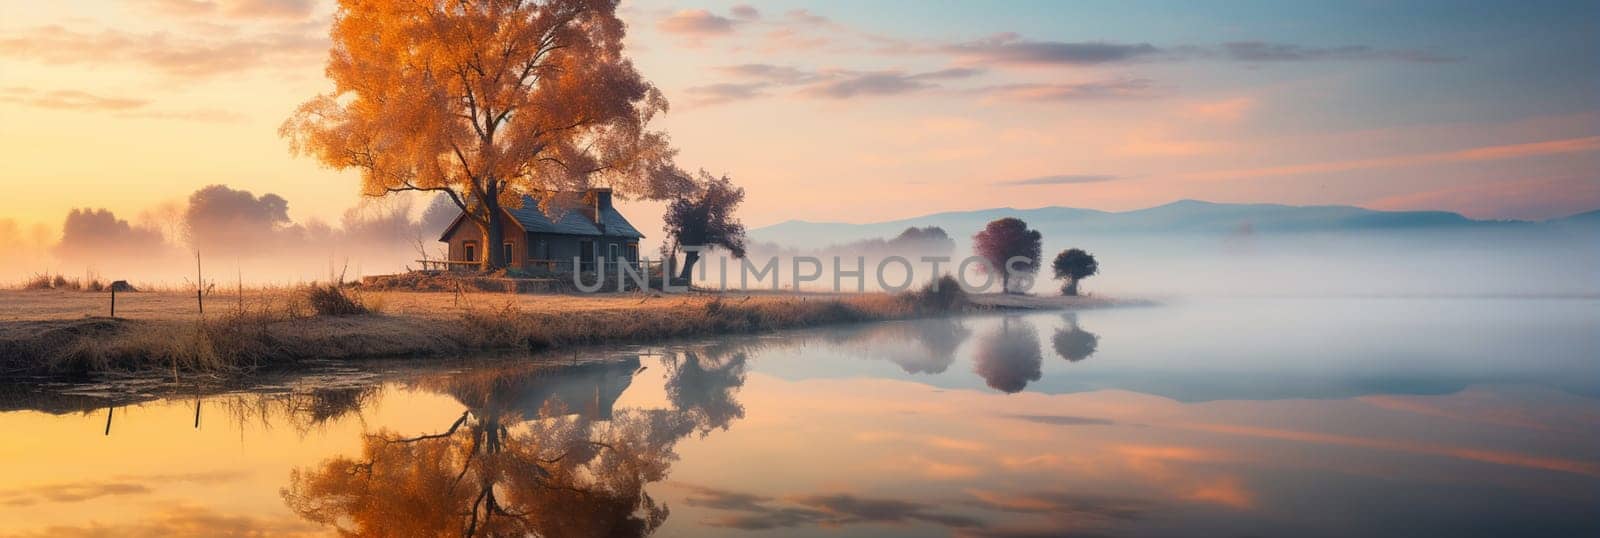 Digital art of a lake with an island and forests in the background. High quality photo